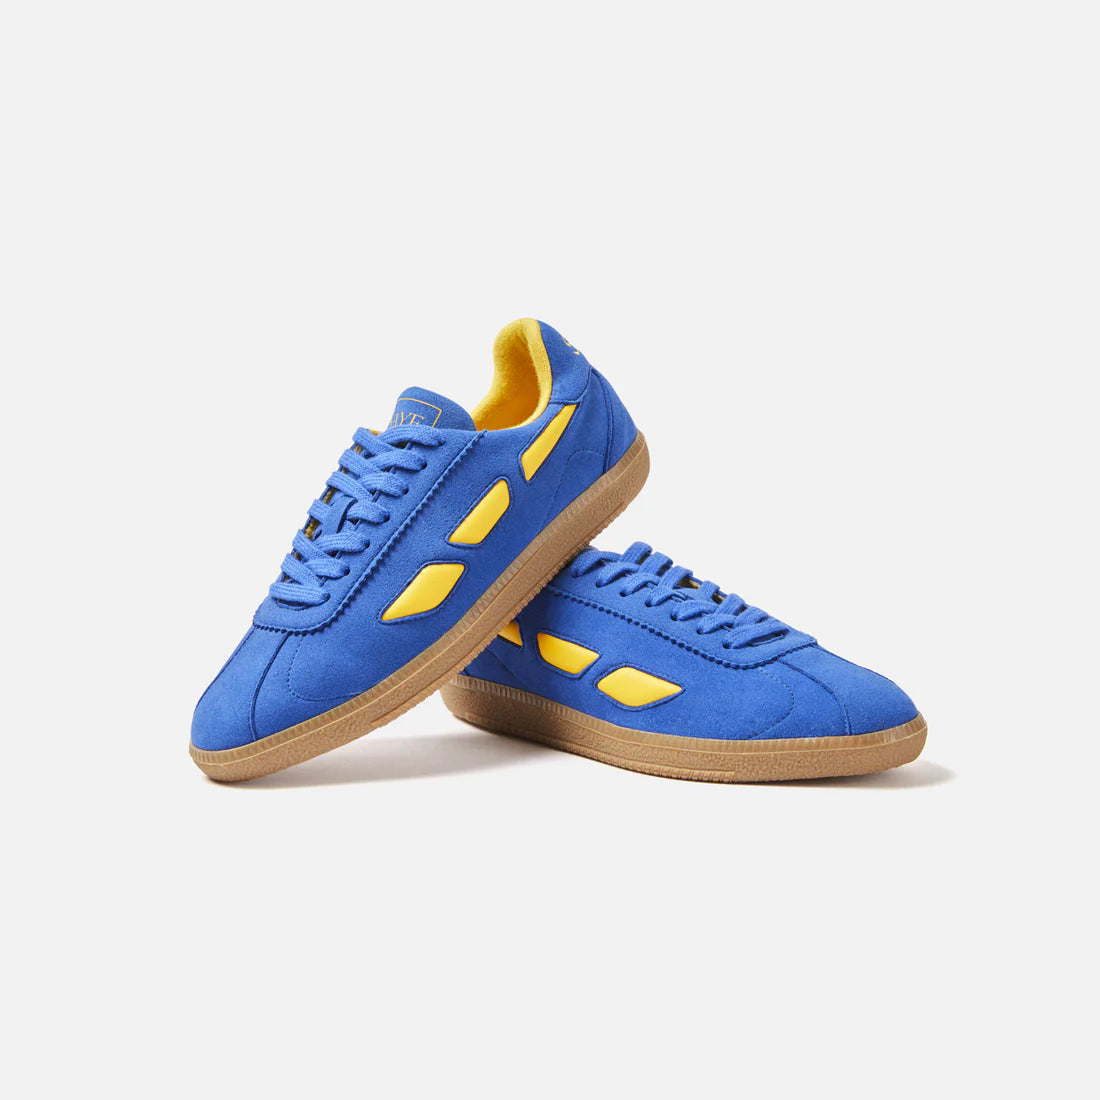 Blue suede sneakers with yellow side detail